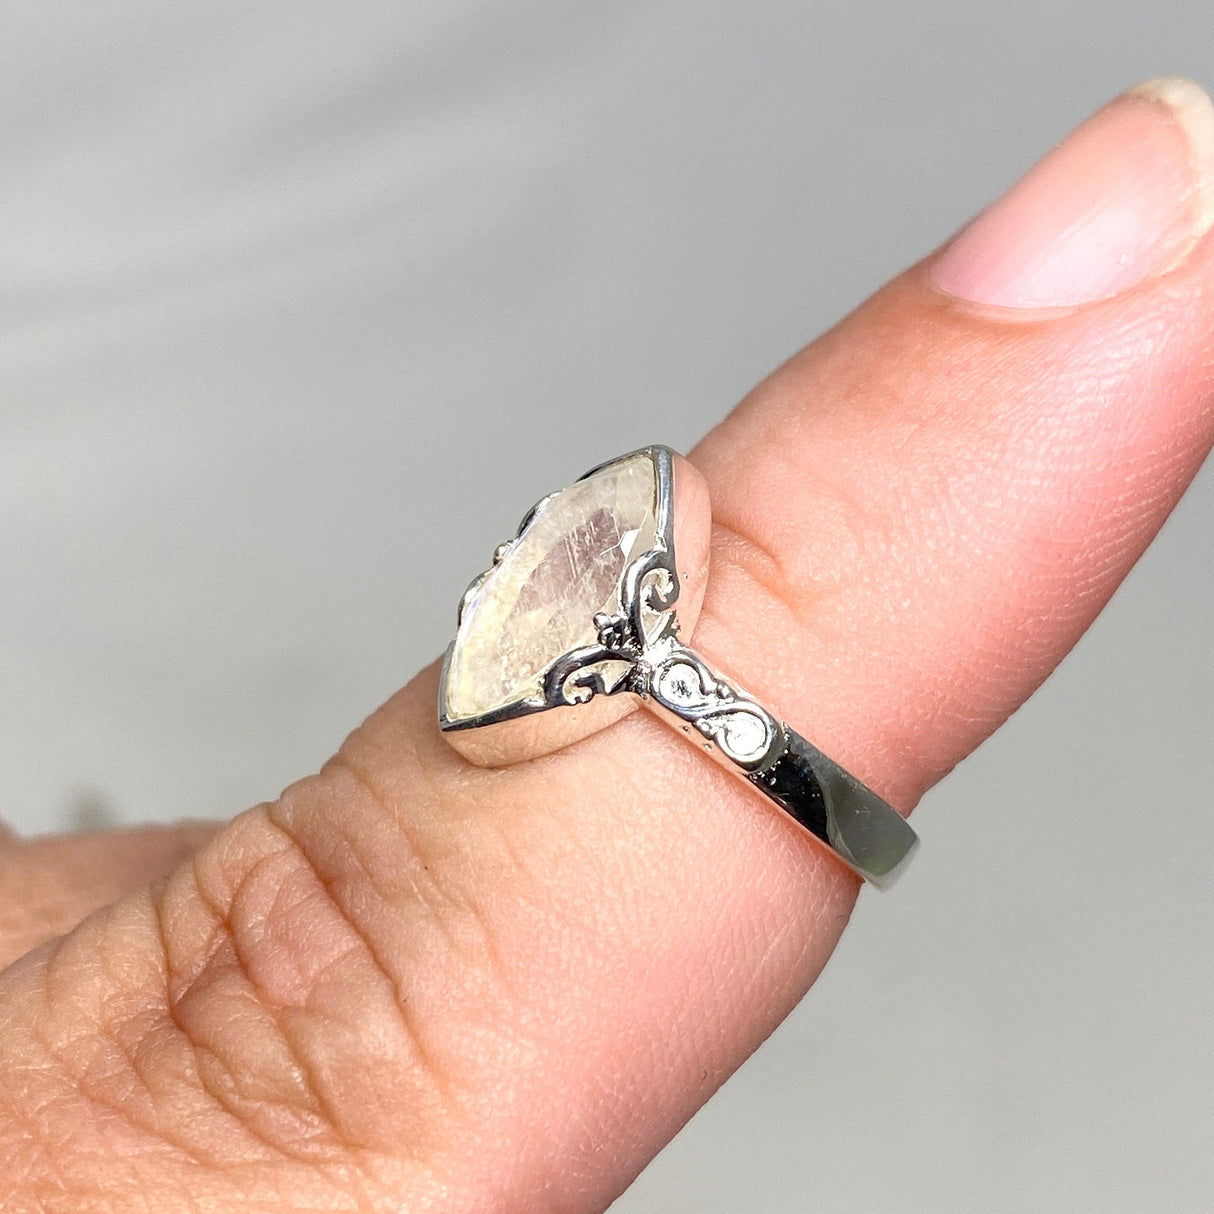 Moonstone Faceted Marquise Ring in a Decorative Setting R3726 - Nature's Magick